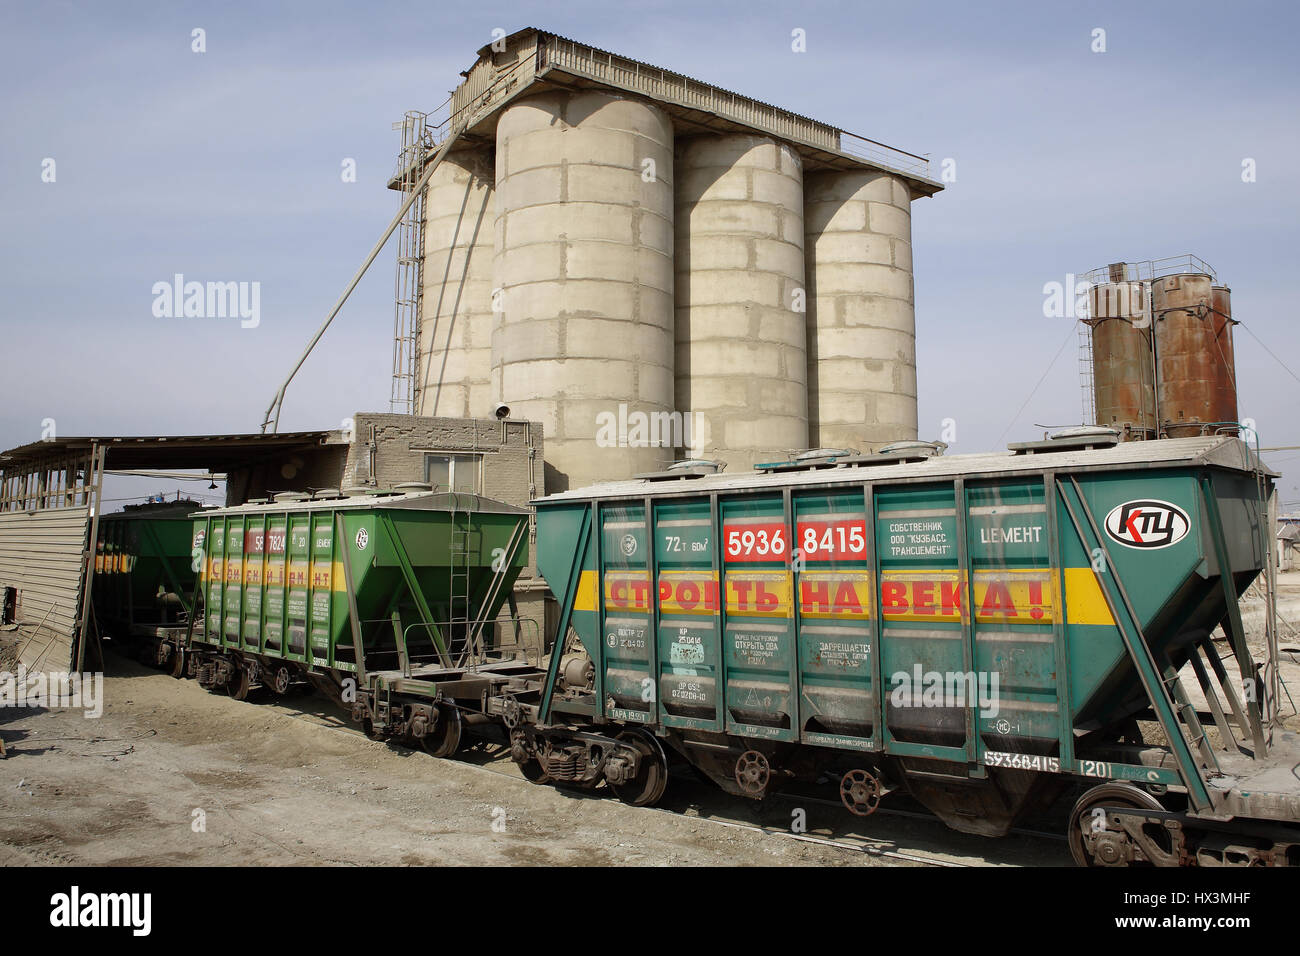 St. Petersburg, Russia - April 27, 2009: Railway wagons for transportation of dry cargo, freight train with car load of cement, wagon collecting cemen Stock Photo